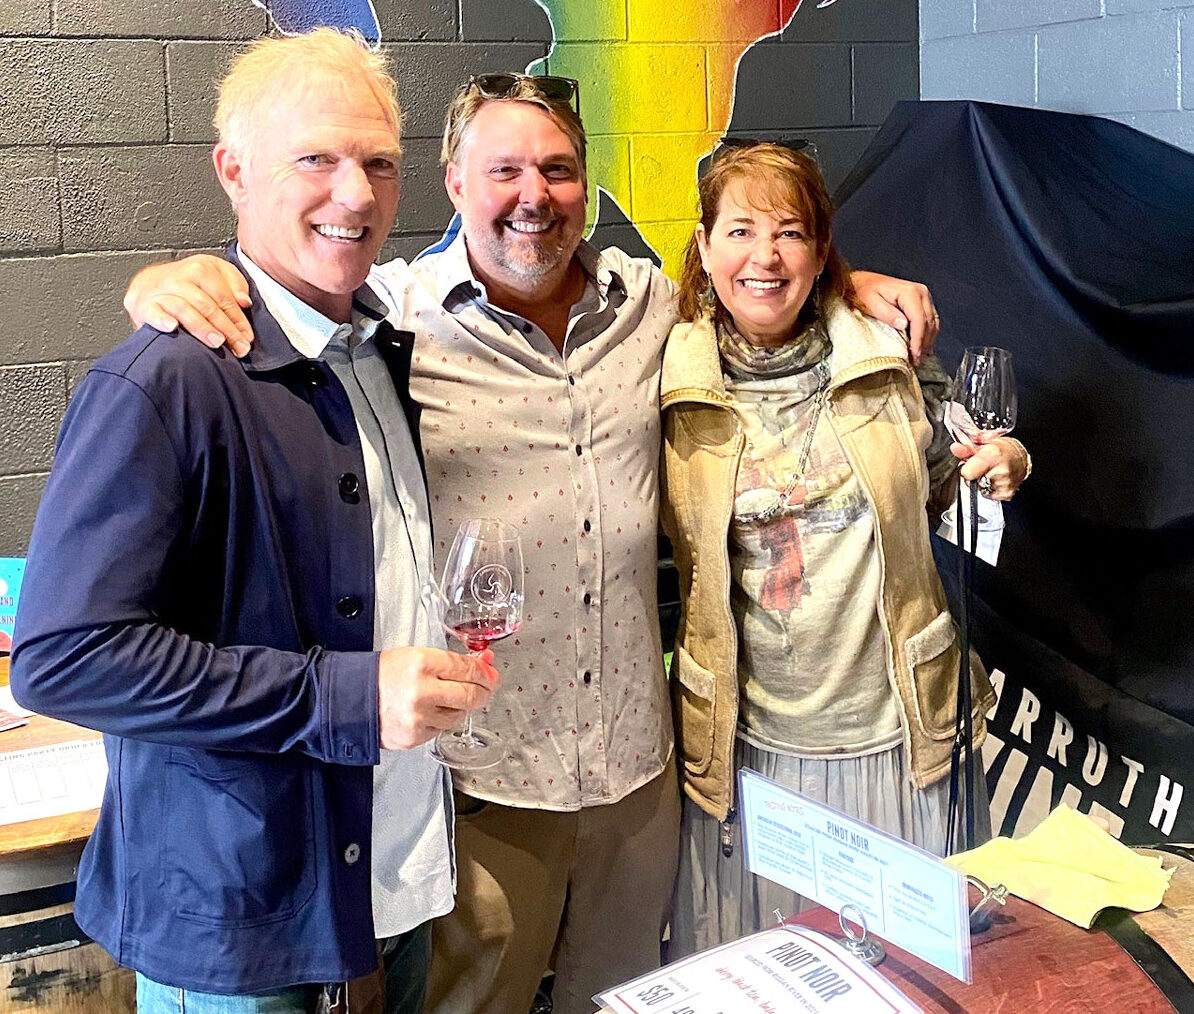 Wine member Keith Greener, from left, Carruth Cellars proprietor Adam Carruth and wine member Debbie Day at the Burgundy station.